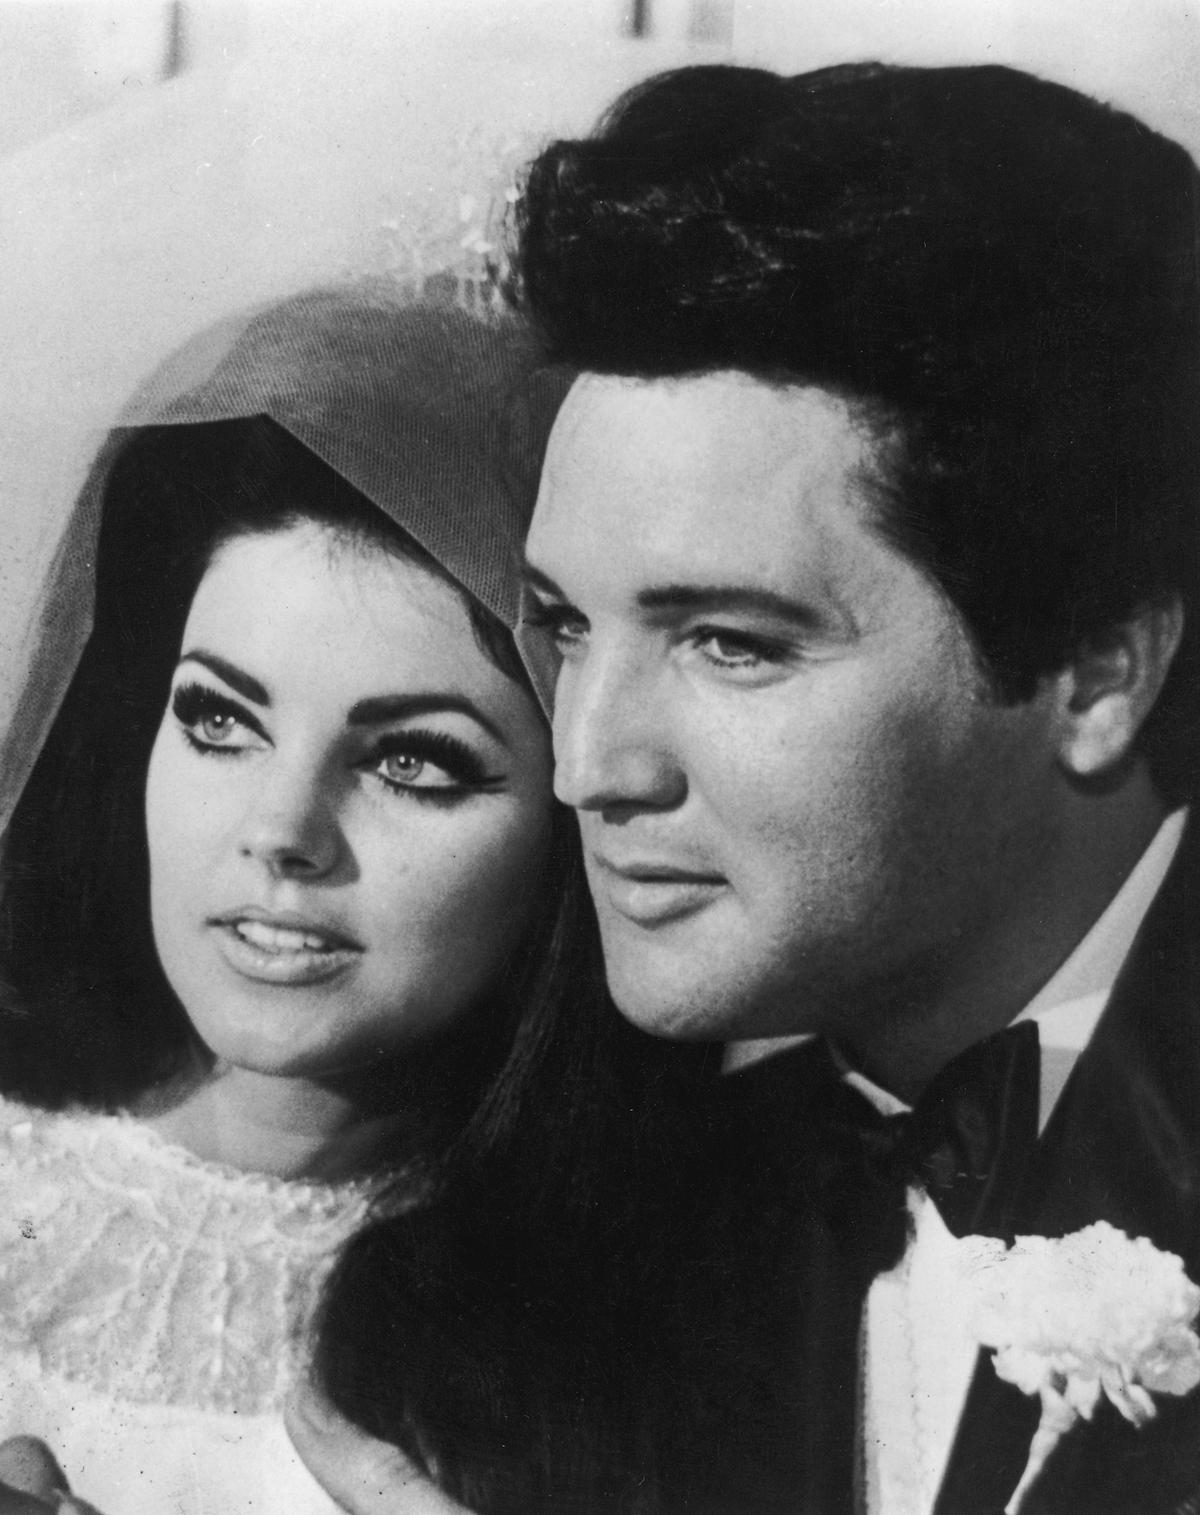 Elvis Presley with his bride, Priscilla Beaulieu, after their wedding in Las Vegas on May 1, 1967 (©Getty Images |Keystone)